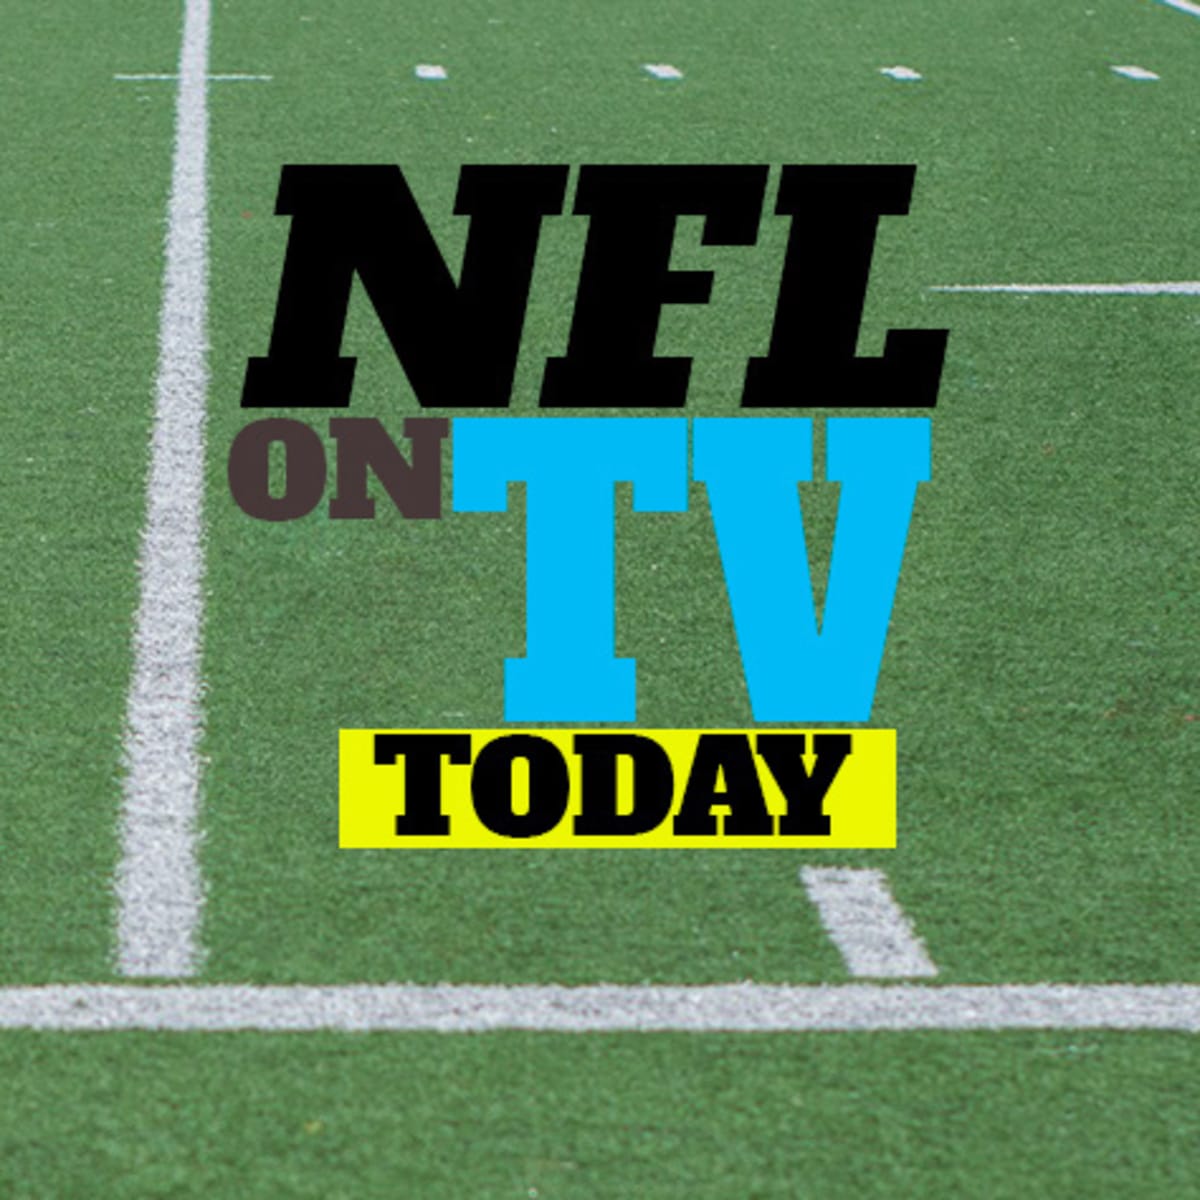 nfl football games on tv today sunday